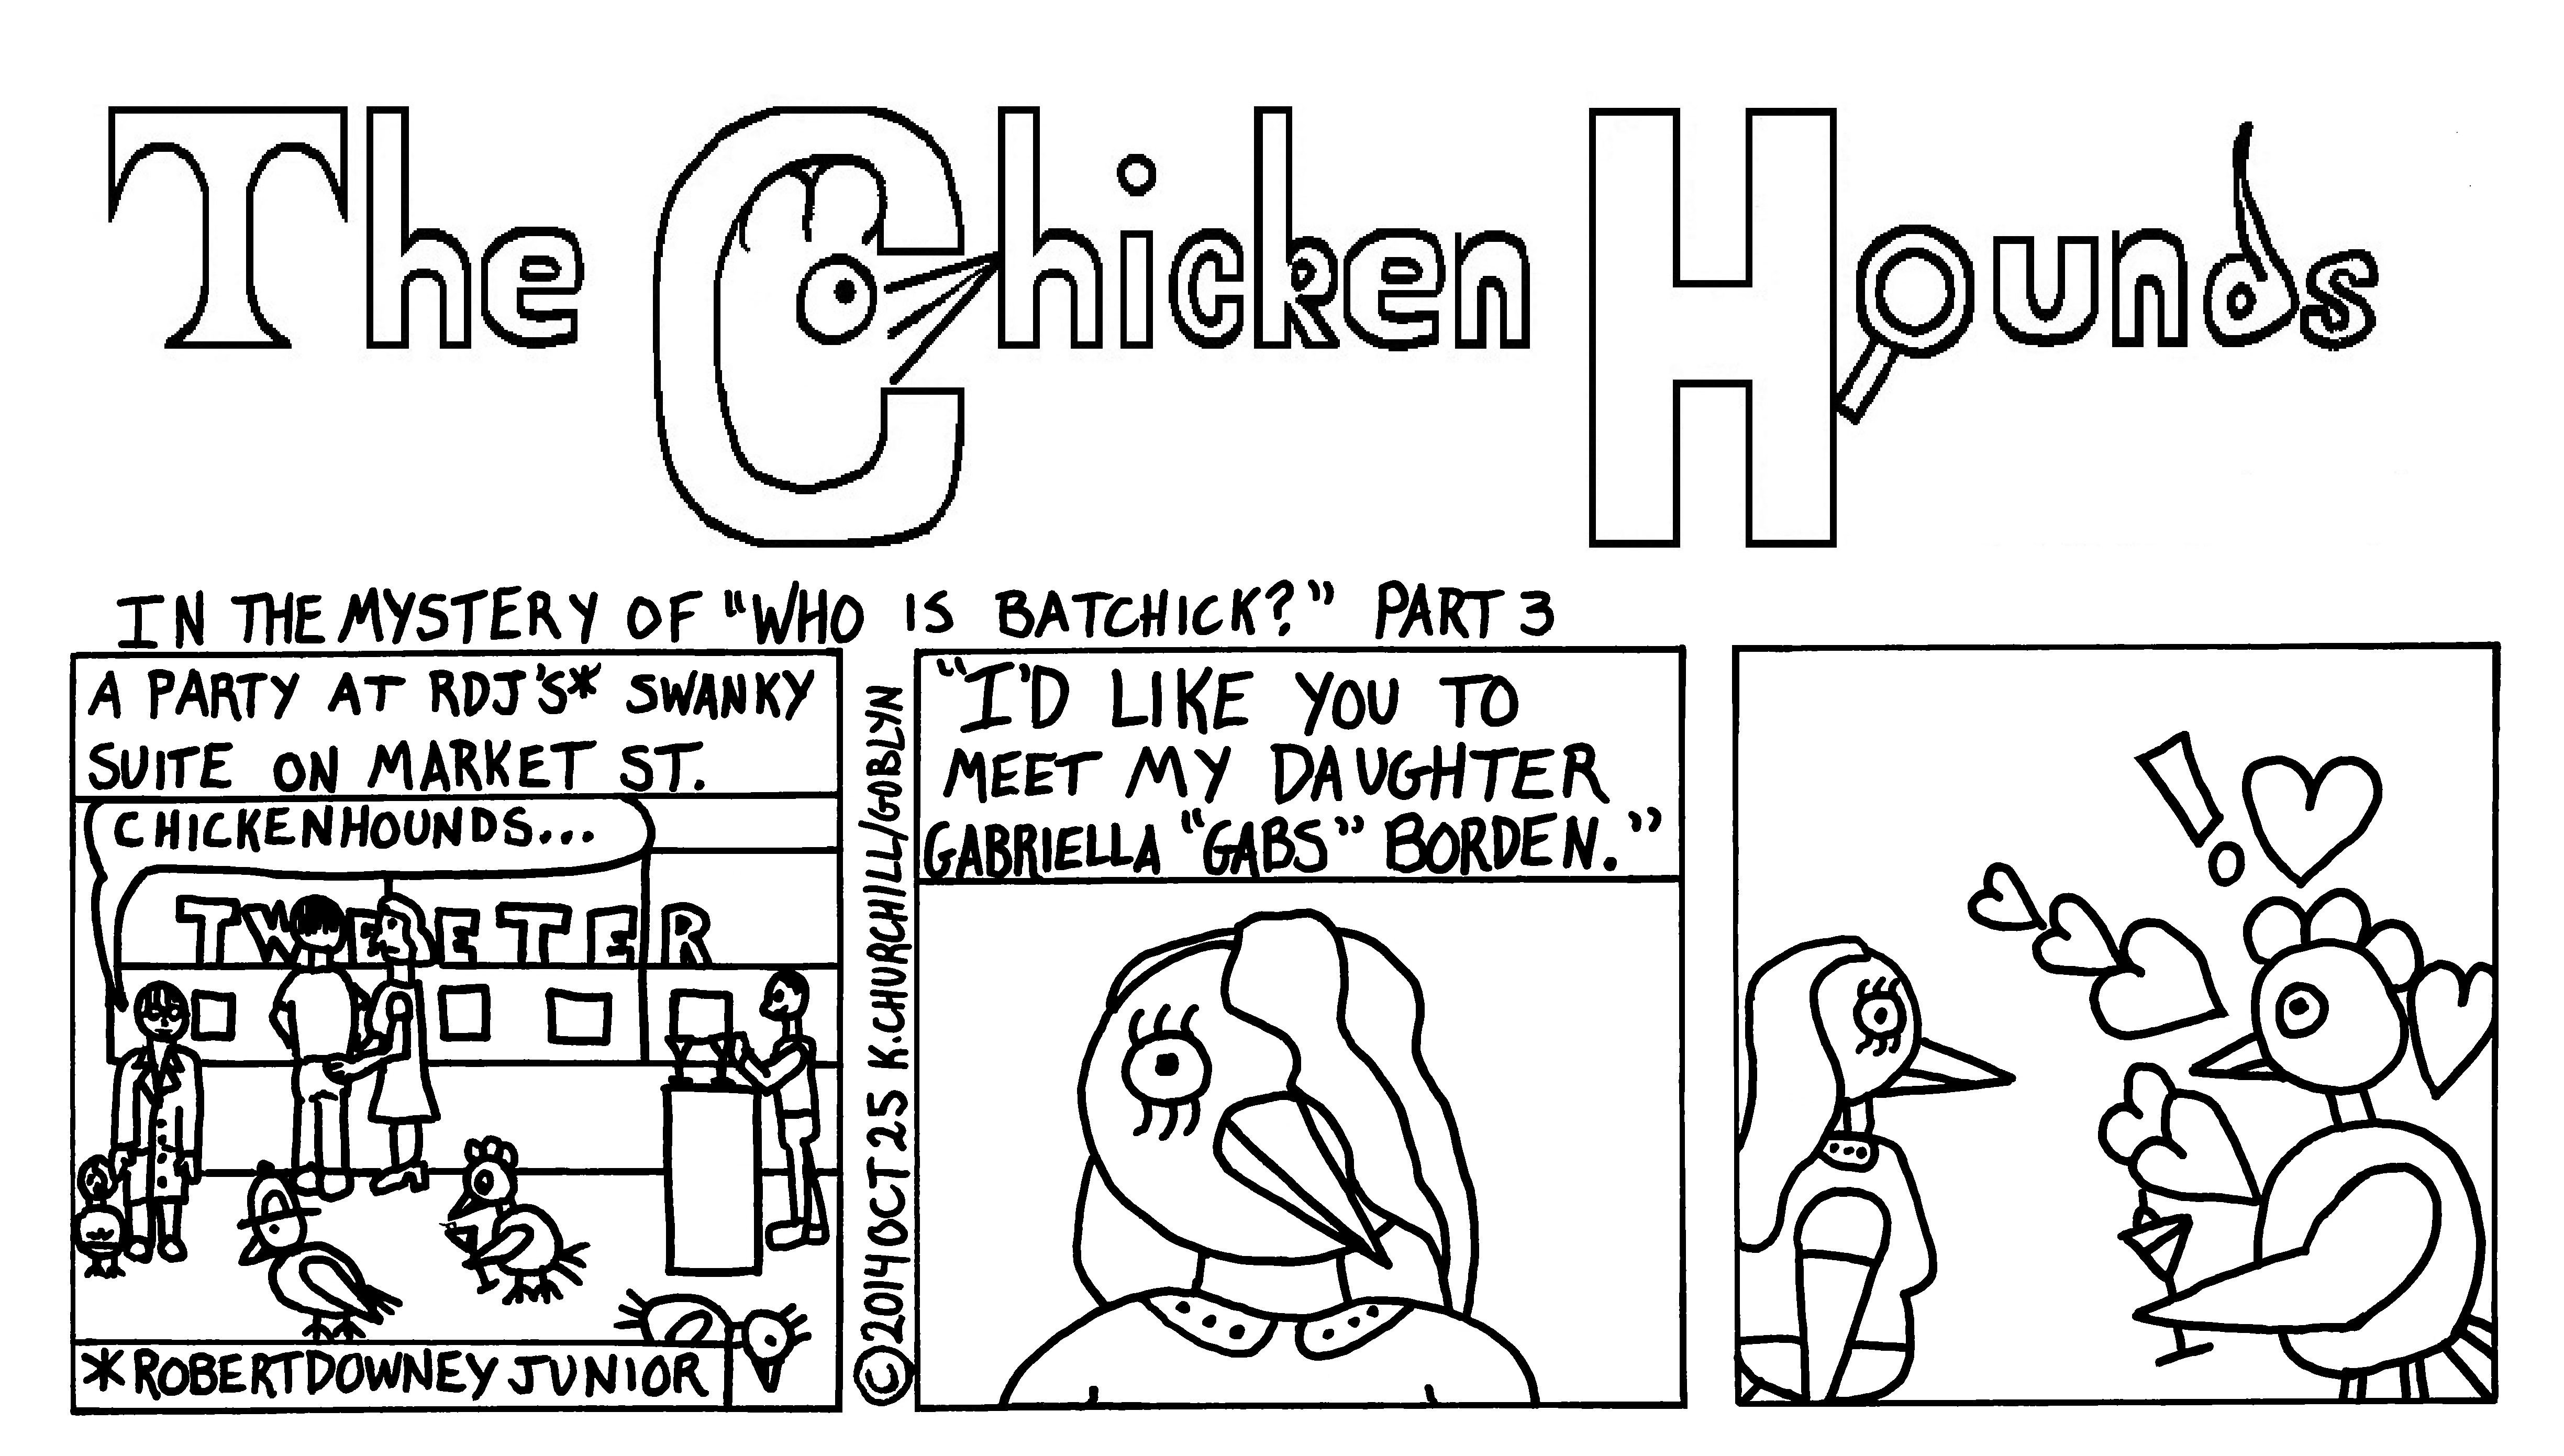 The Chicken Hounds in the Mystery of "Who is Bat-Chick?"